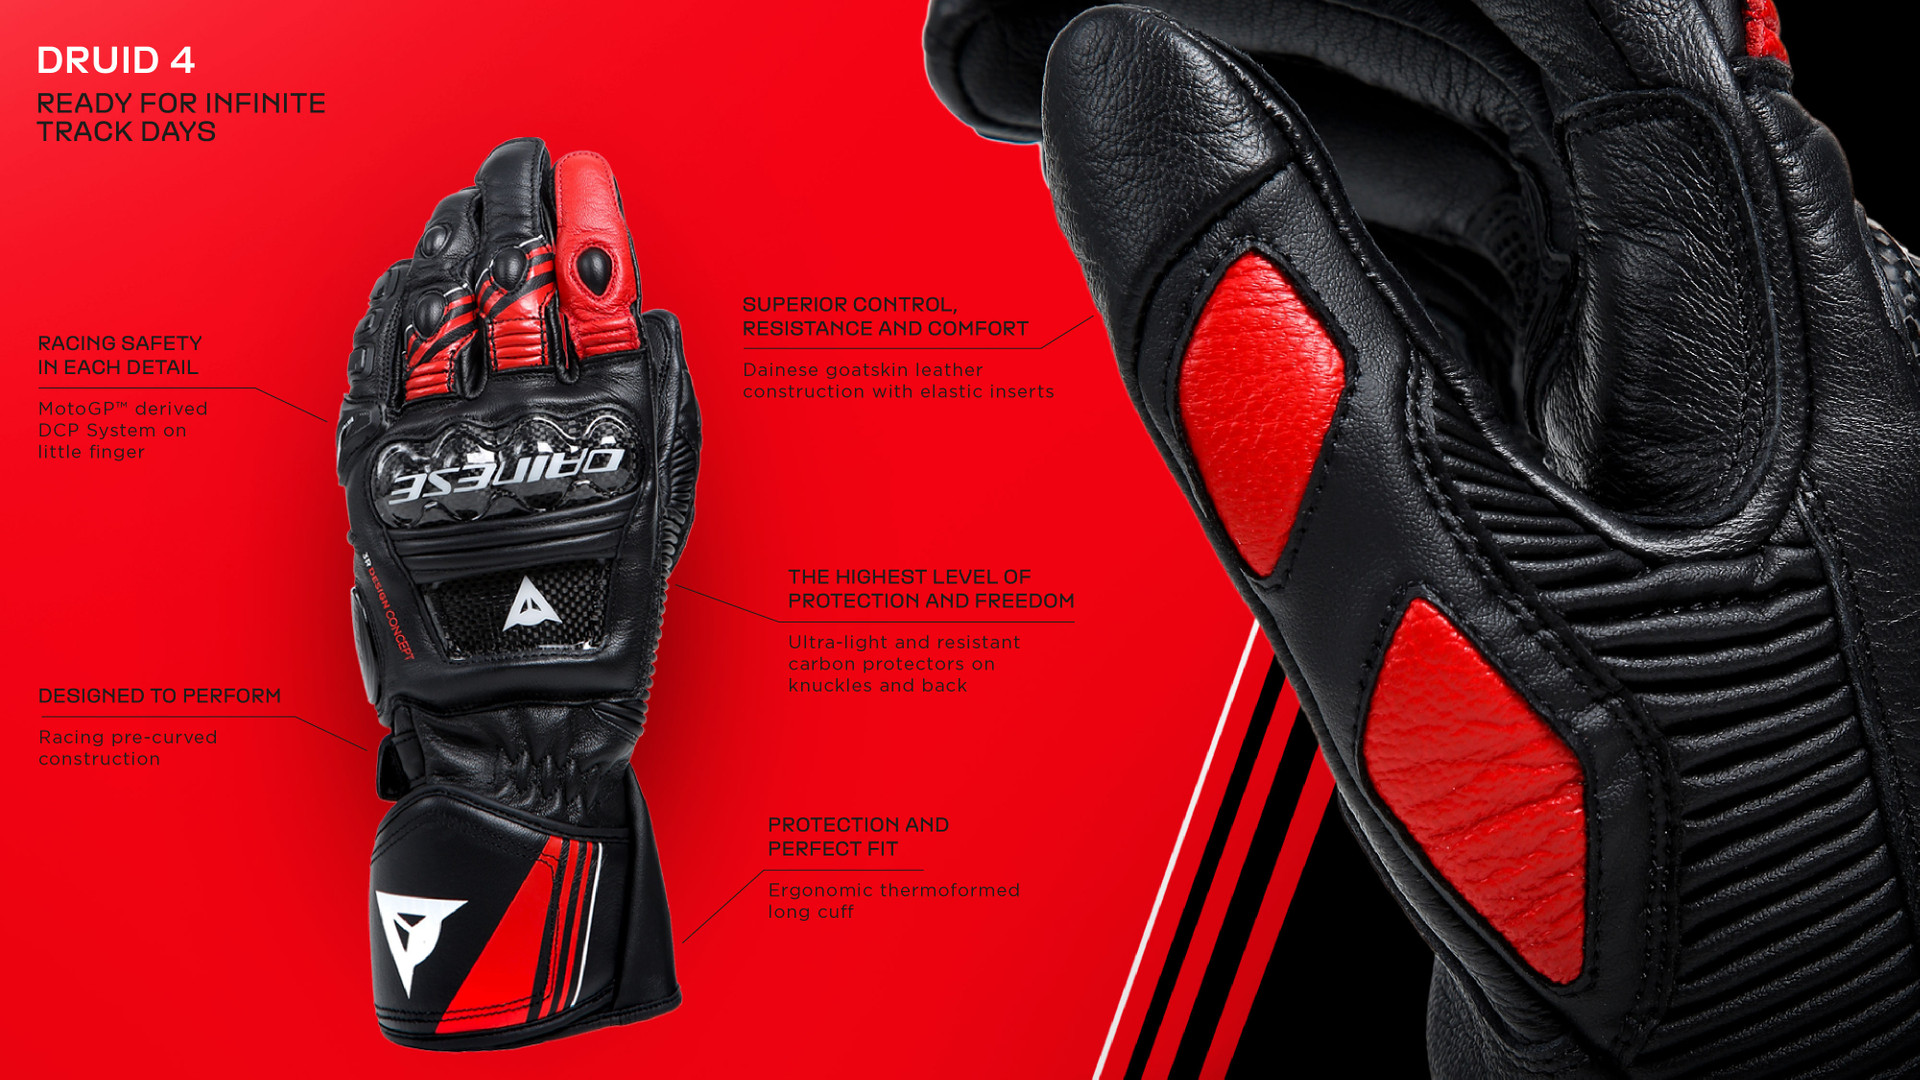  Dainese Druid 4 Motorcycle Riding Gloves -  Infographic 